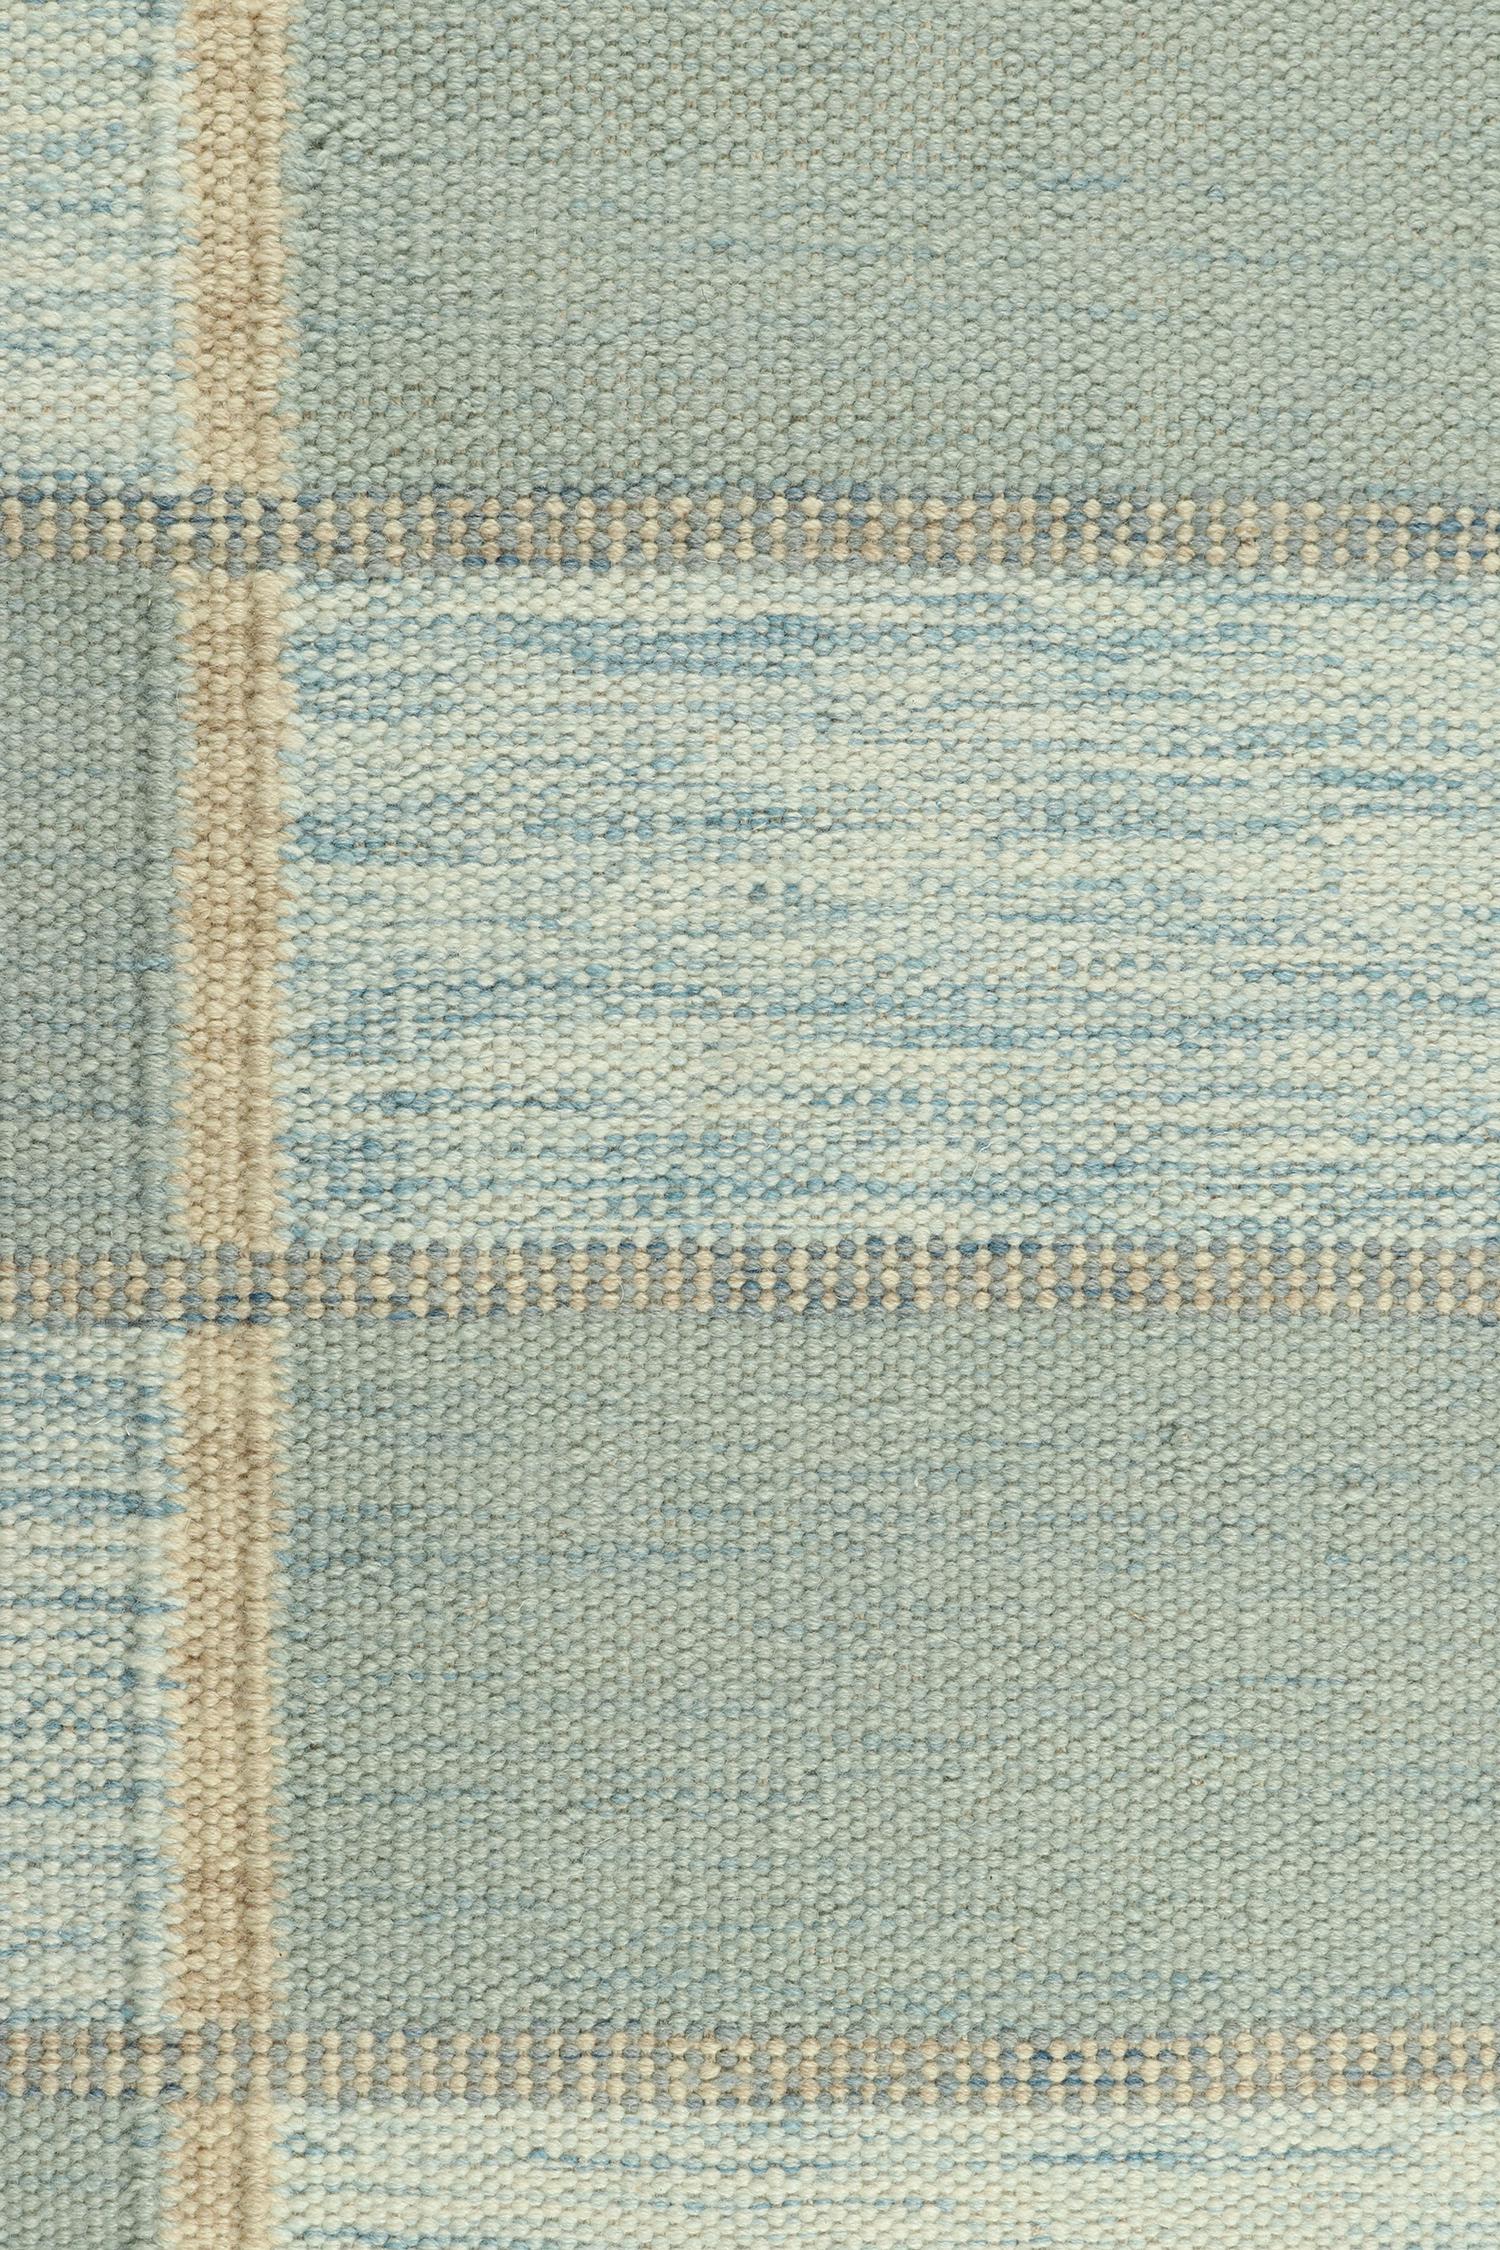 Rug & Kilim’s Scandinavian Kilim Style Runner in Seafoam Geometric Pattern In New Condition For Sale In Long Island City, NY